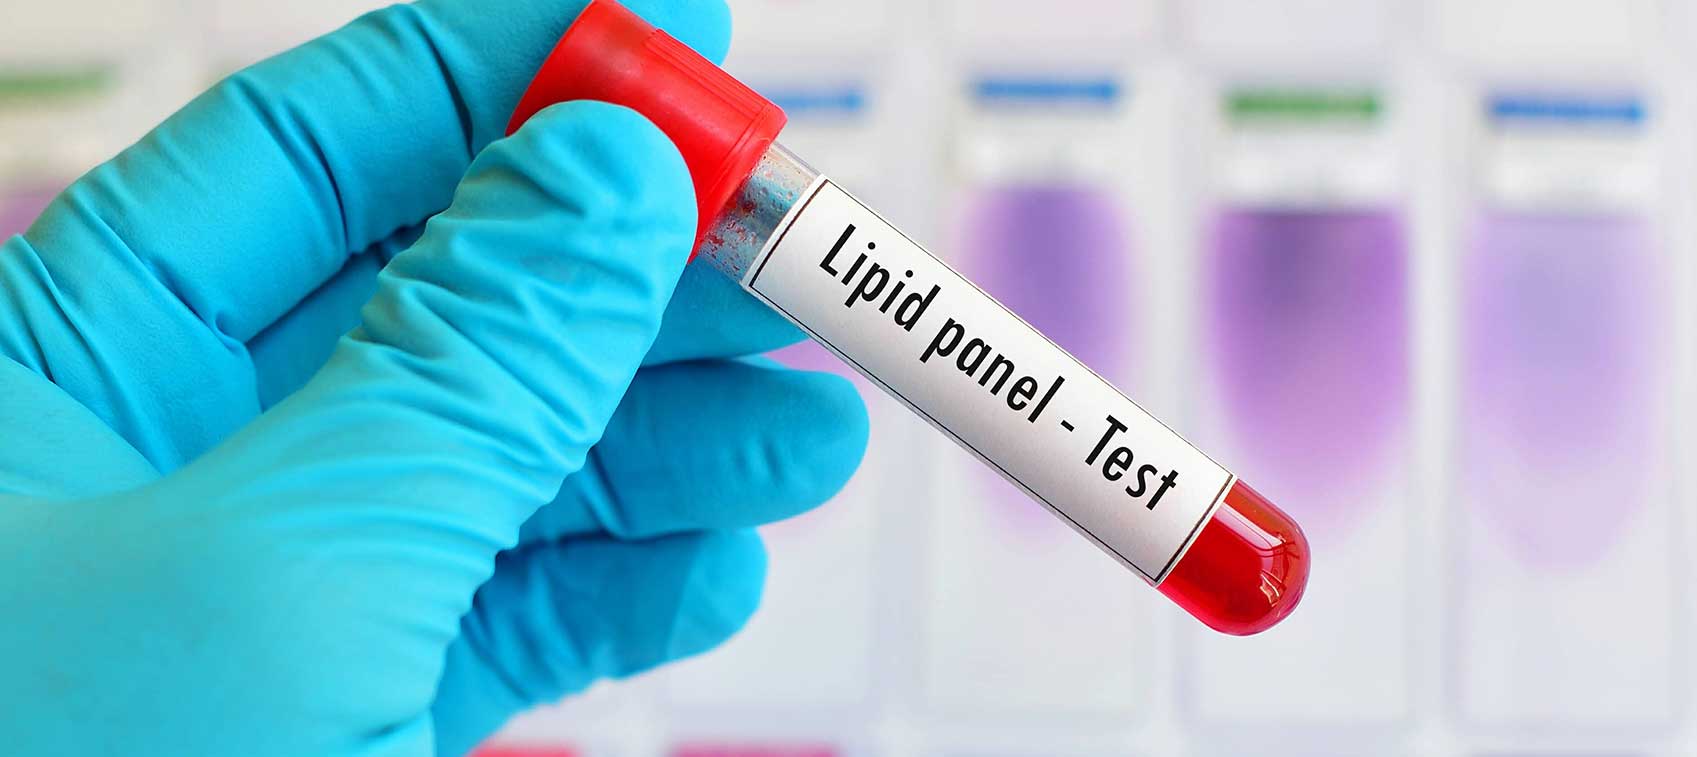 Beware of Elevated Lp(a) Cholesterol Levels